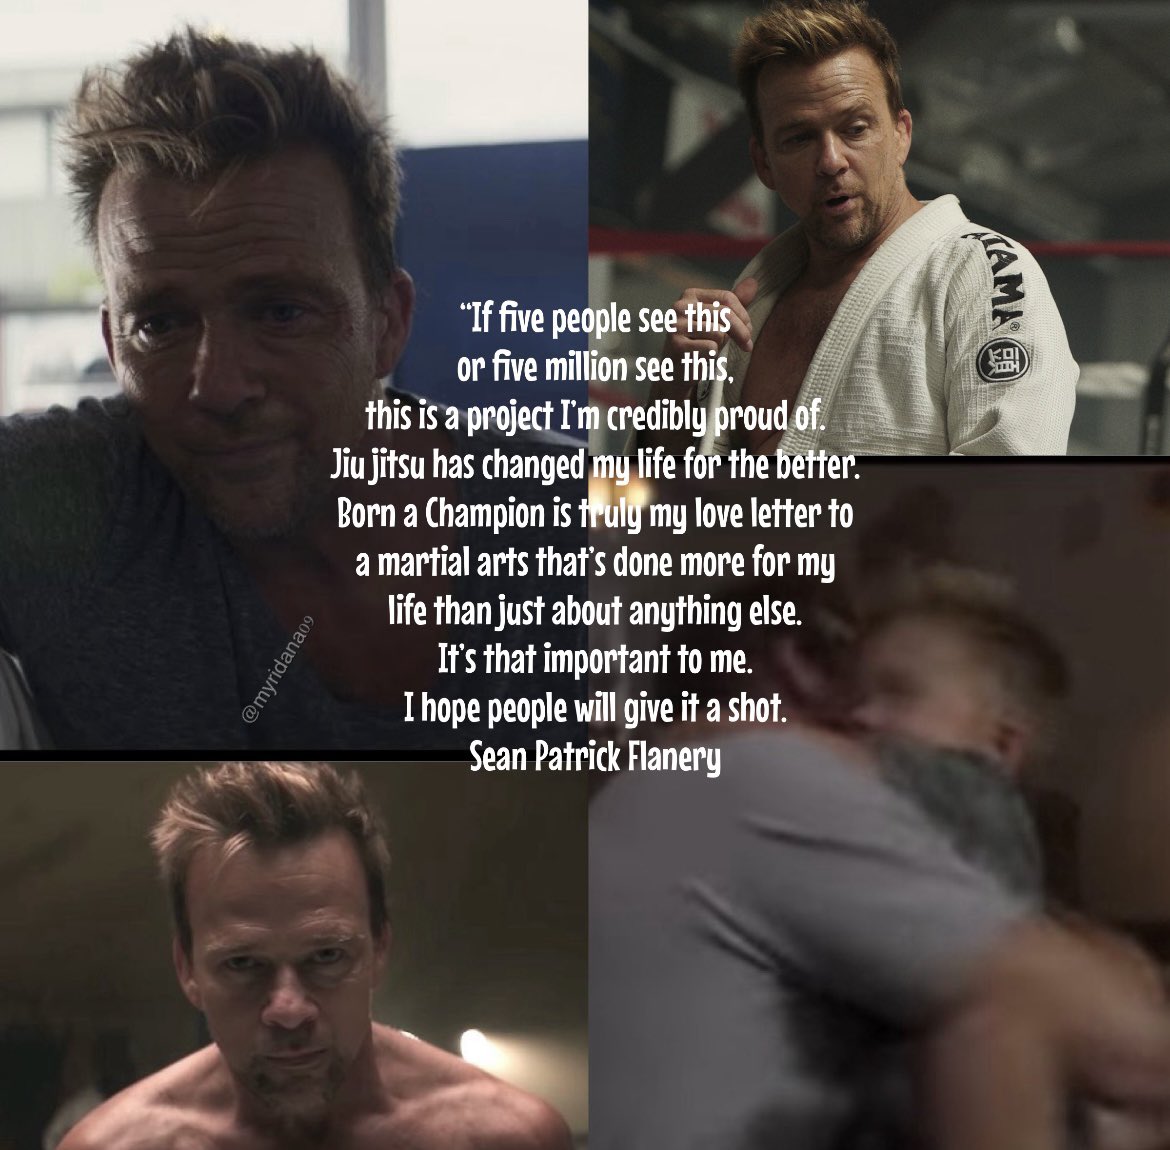 A great story combined with great music makes this movie more than just a martial arts movie. It’s a love letter and it’s touching to see how the passion for jiu jitsu is shown #seanpatrickflanery #actor #author #producer #director #bjj #martialarts #inspiration @seanflanery